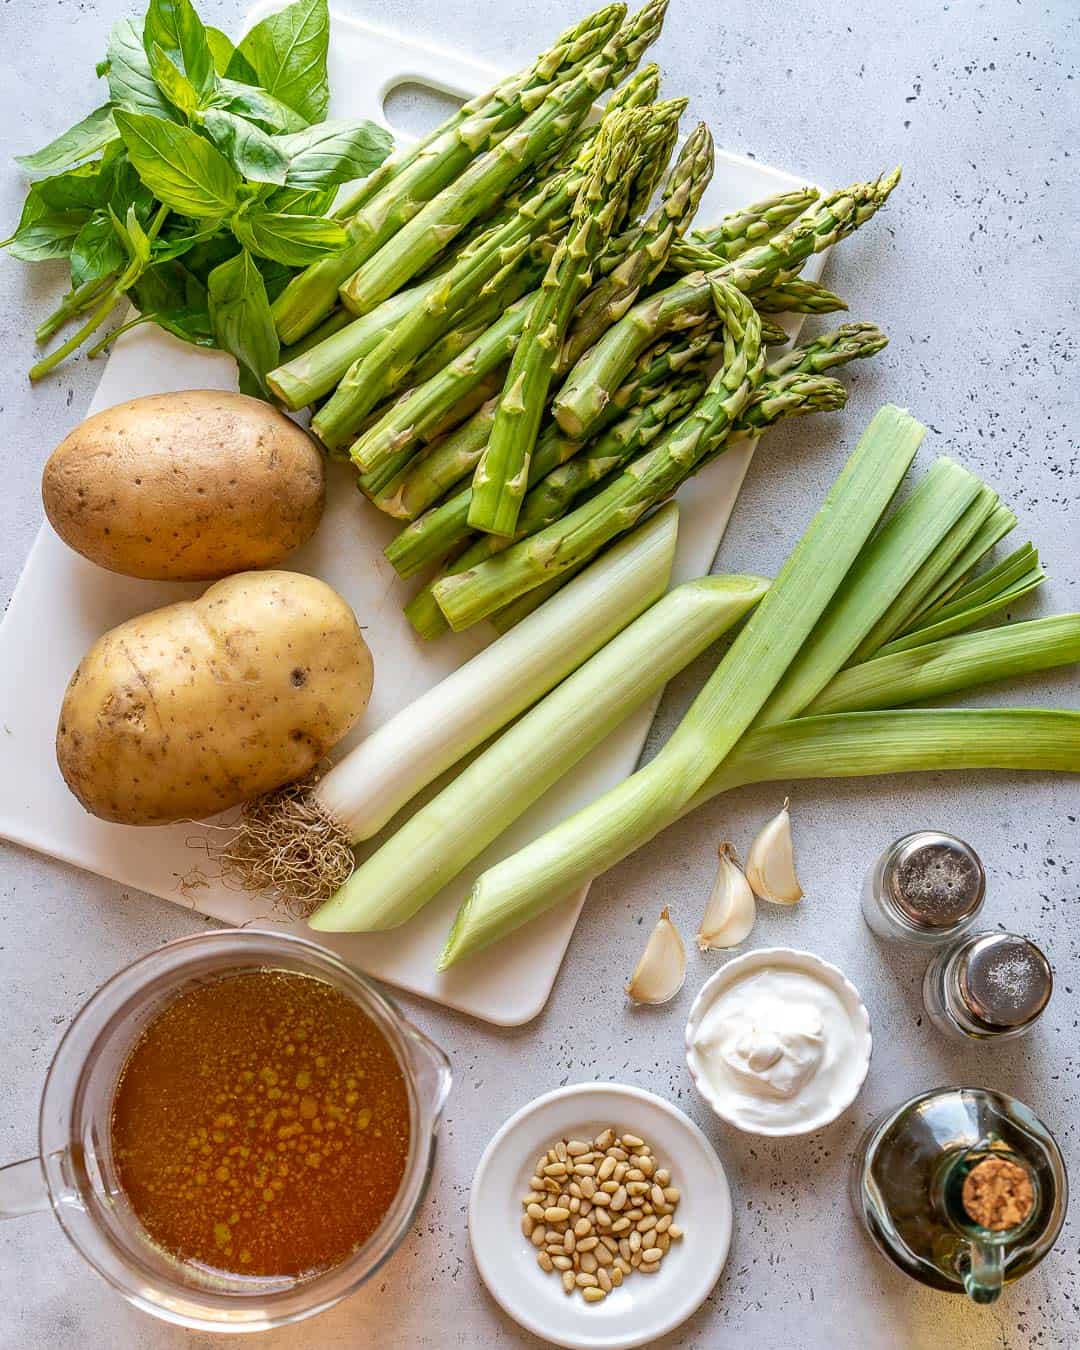 Ingredients for healthy asparagus soup recipe on the counter